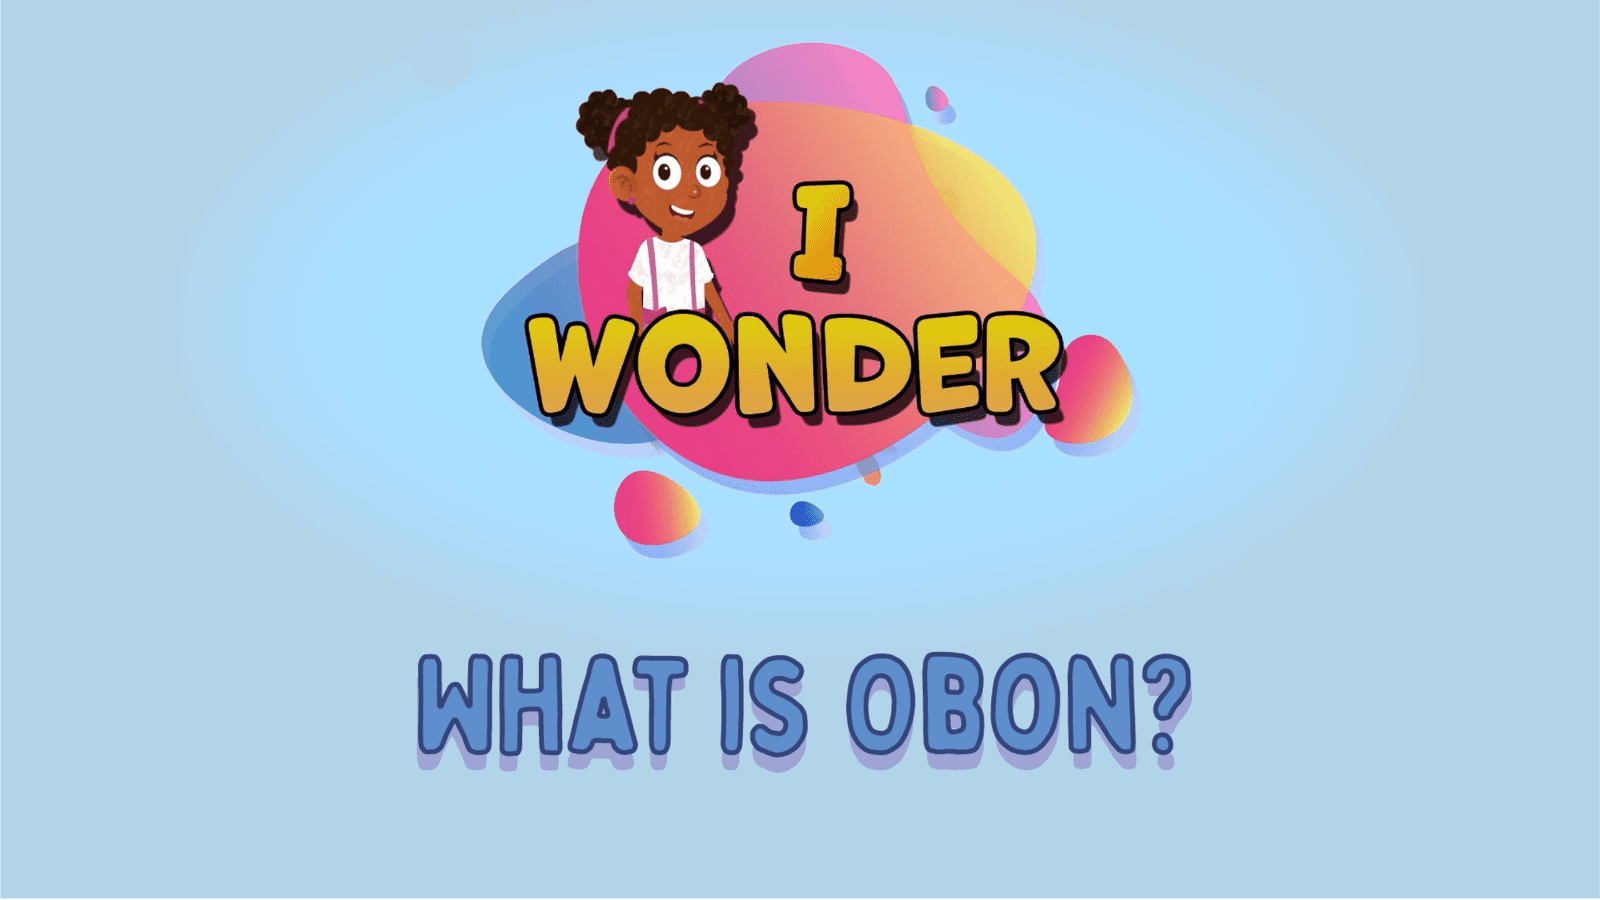 What Is Obon?